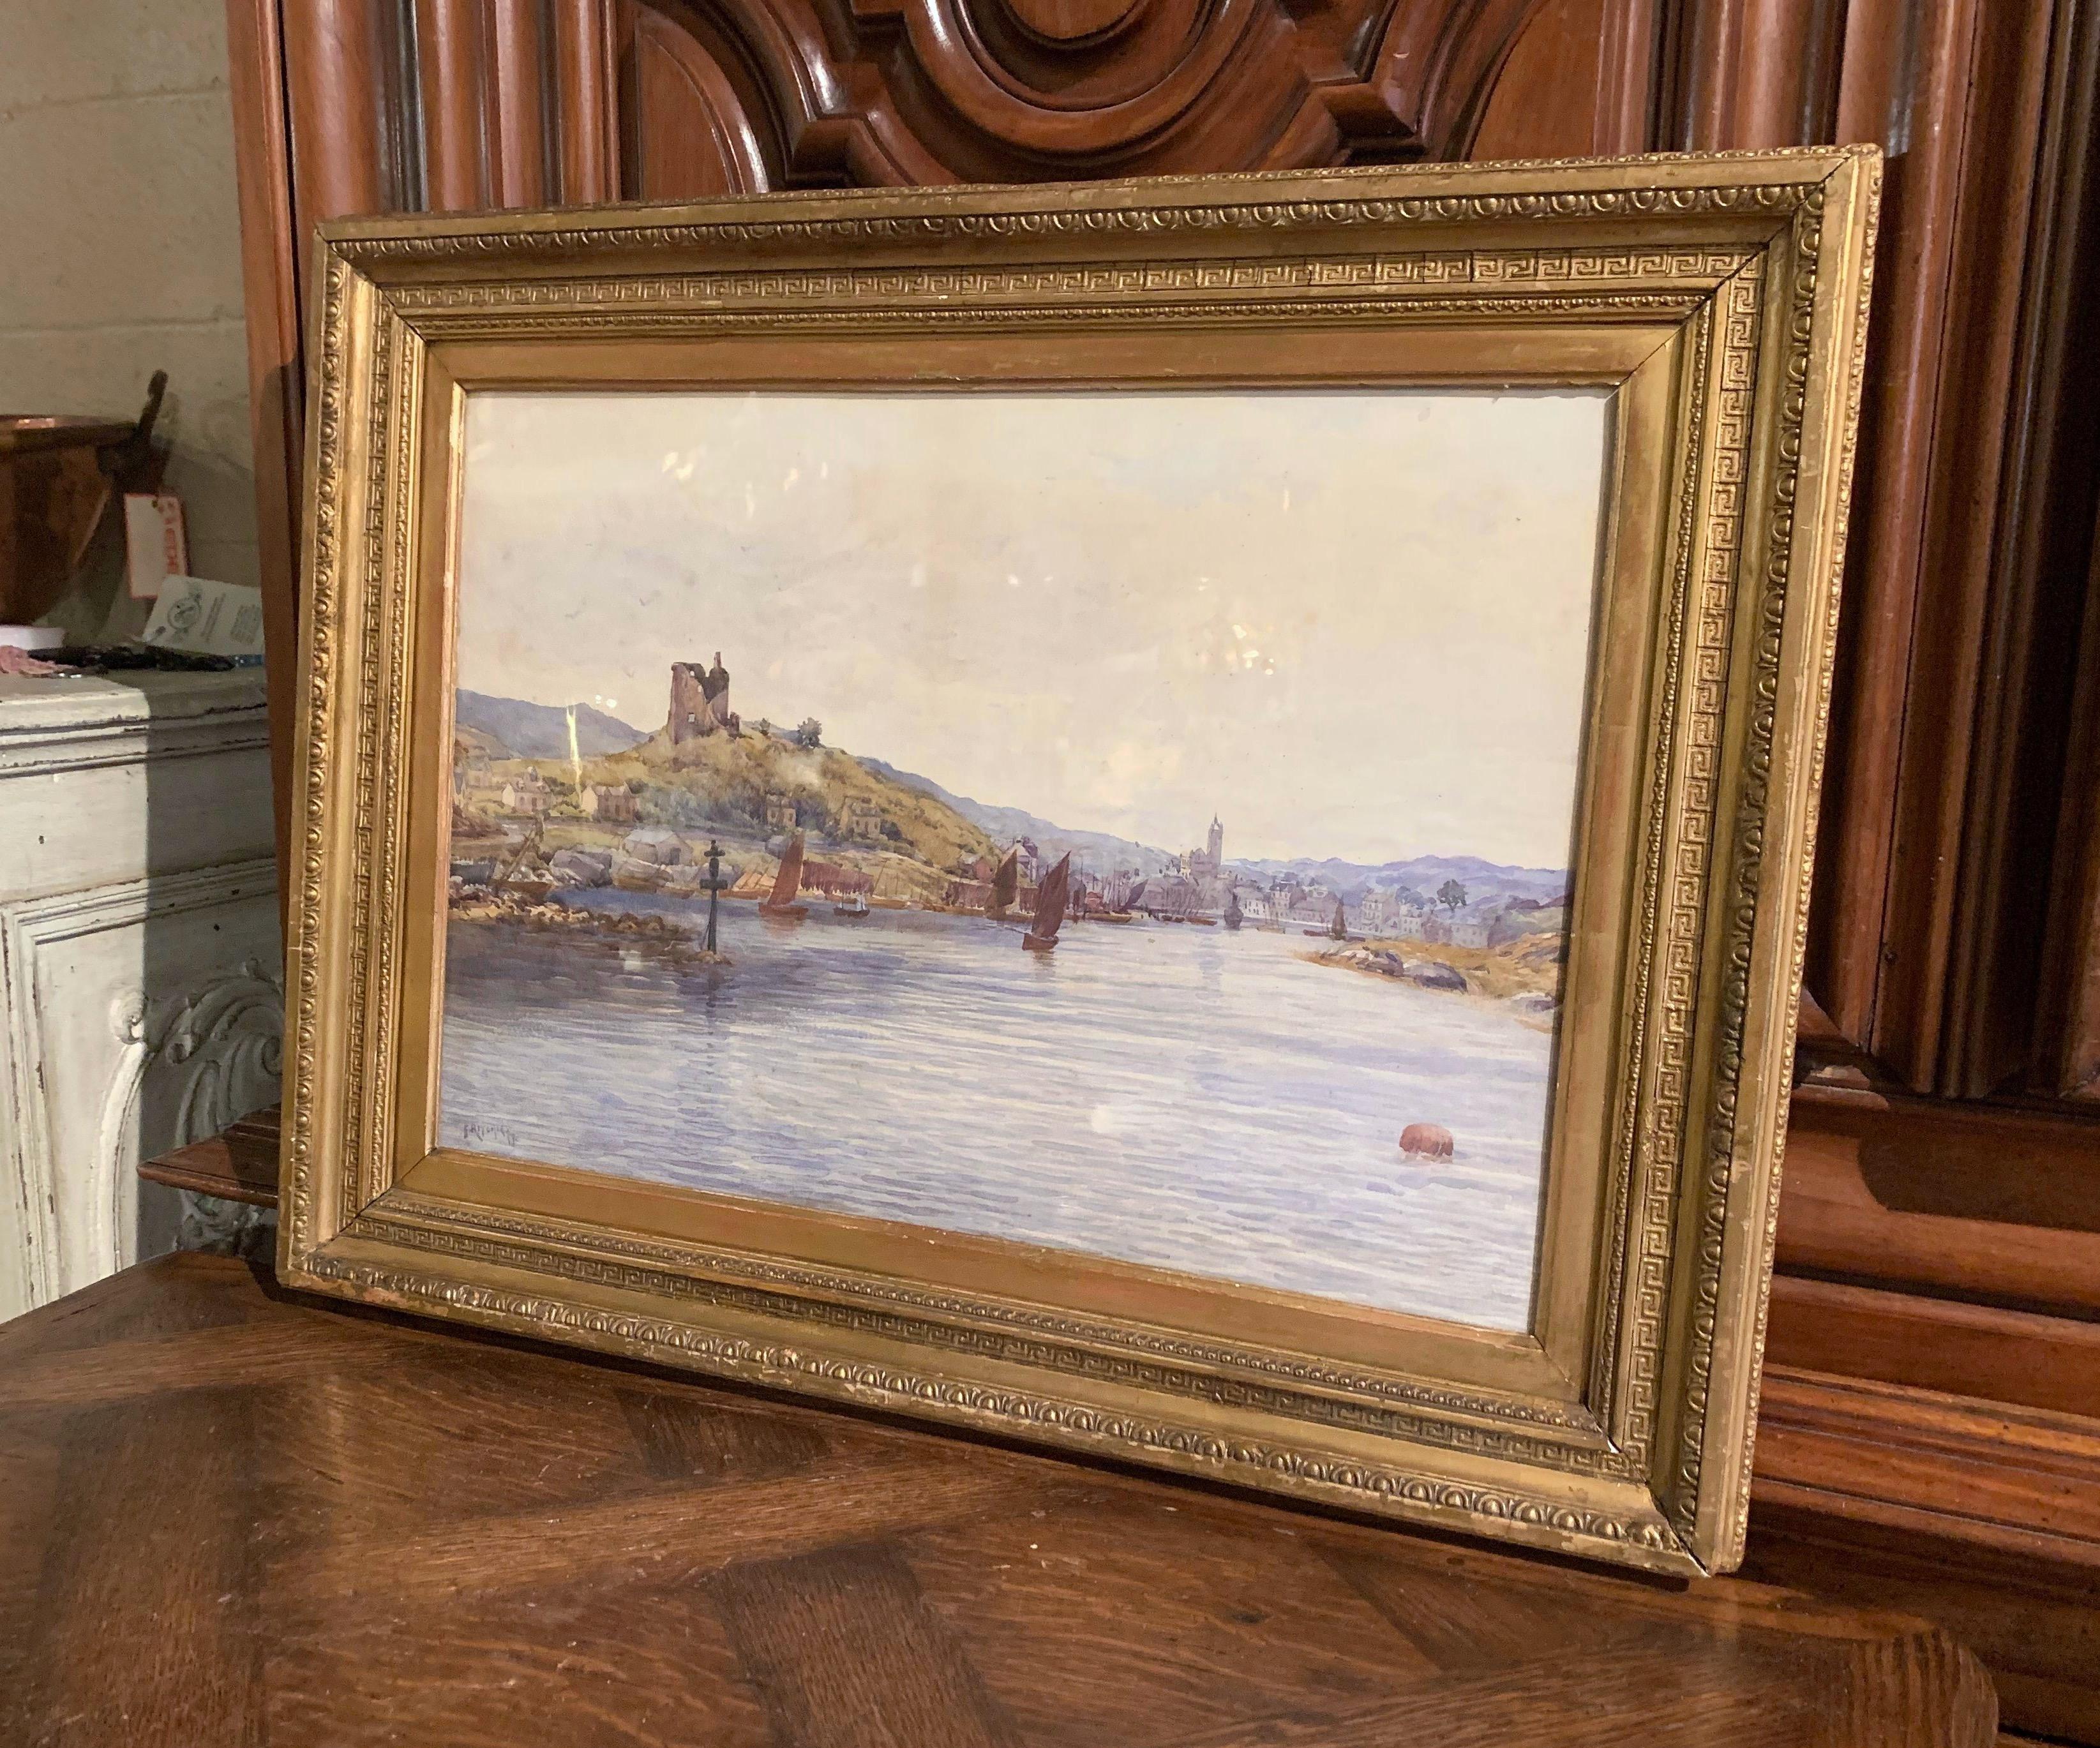 Glass 19th Century English Landscape Watercolor in Gilt Frame Signed F. Ritchie, 1890